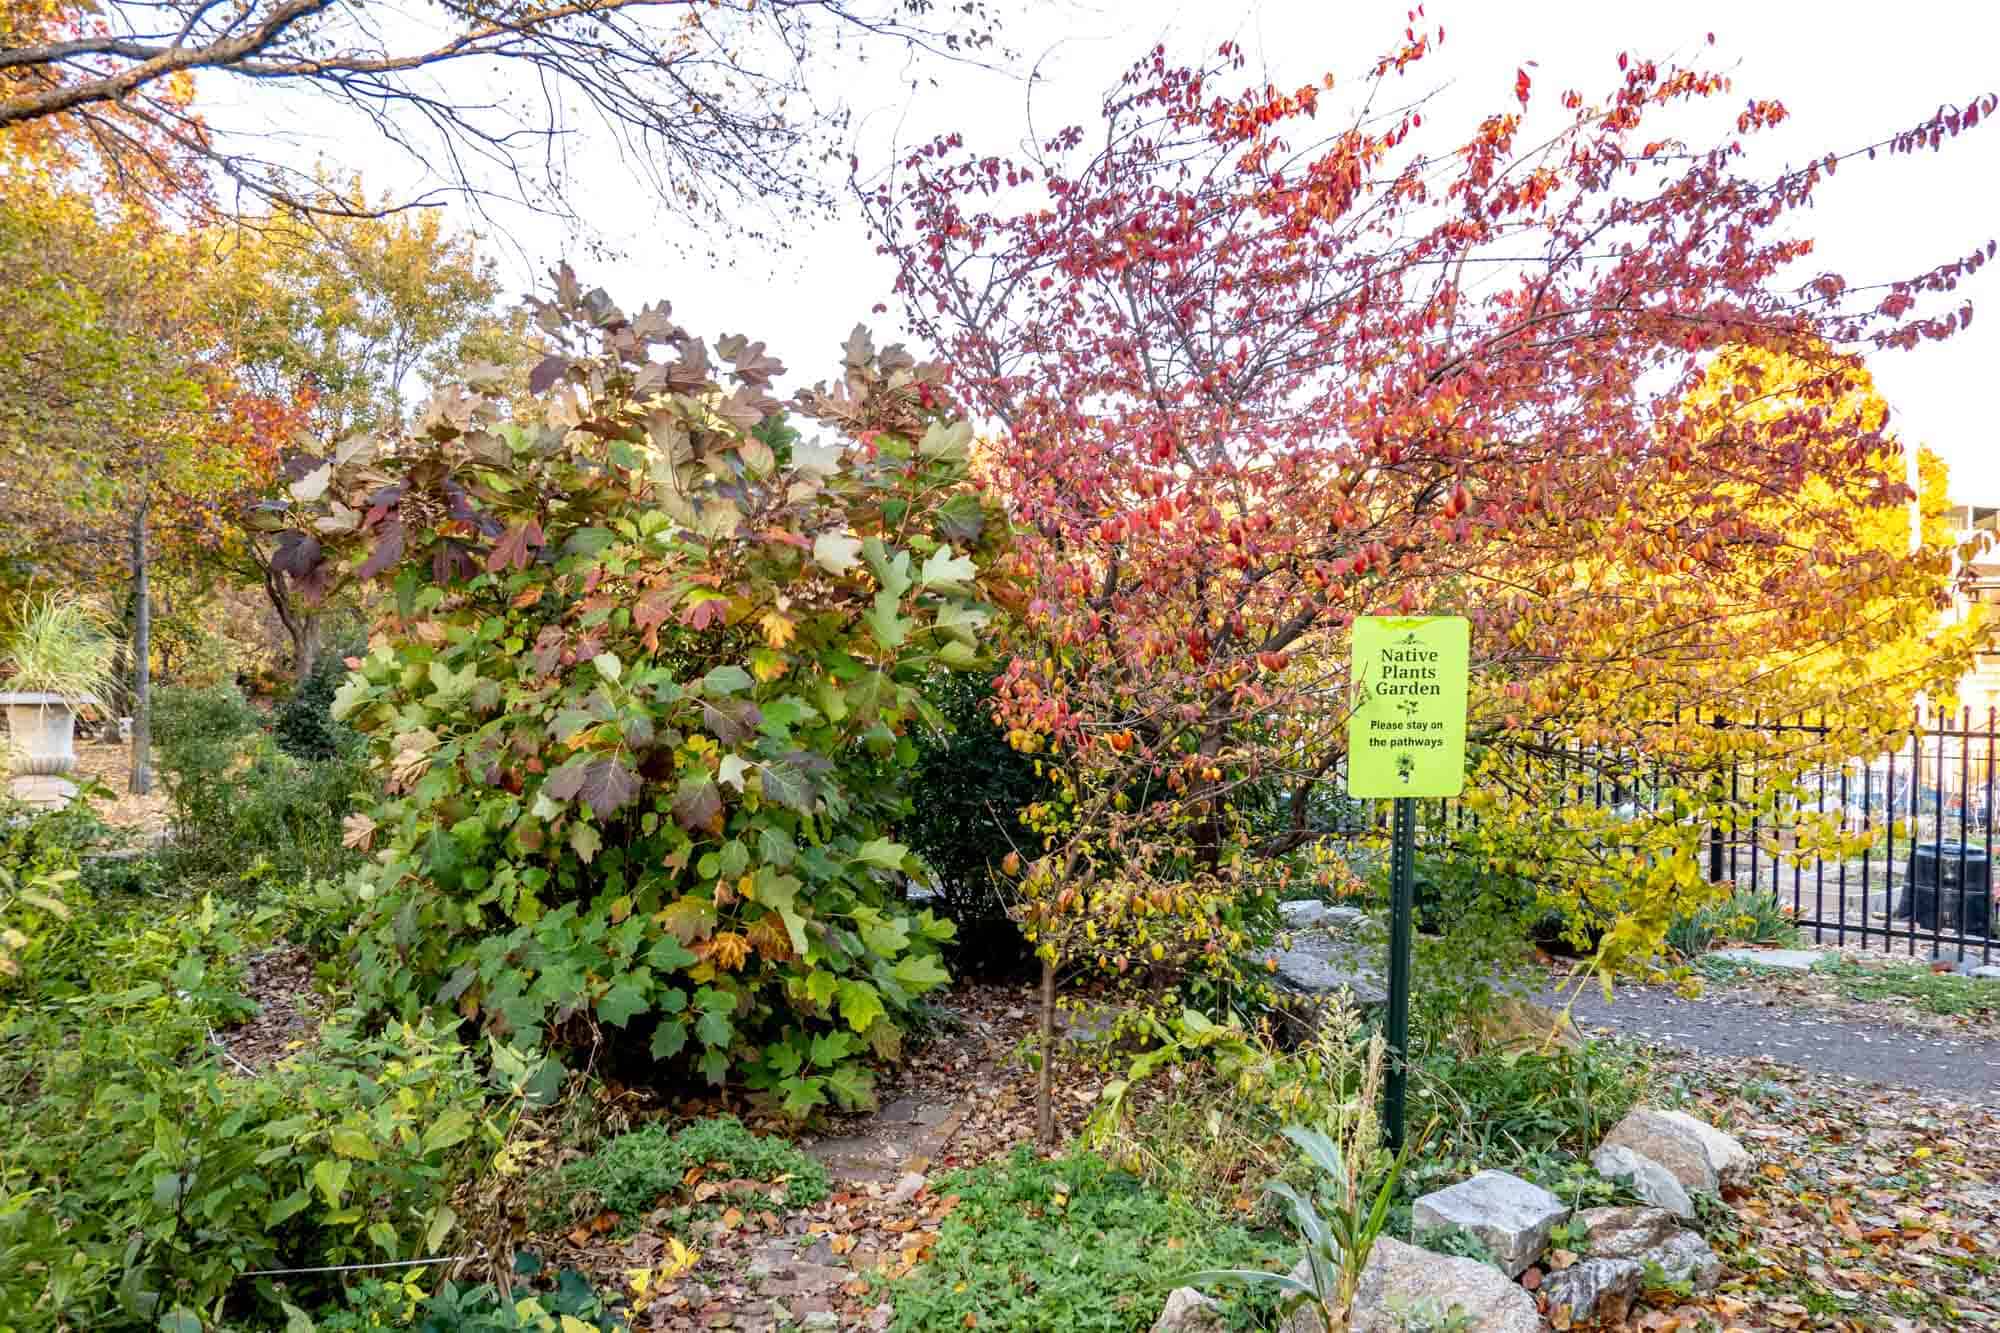 Plants with red, yellow, and green leaves and a sign for "Native Plants Garden"